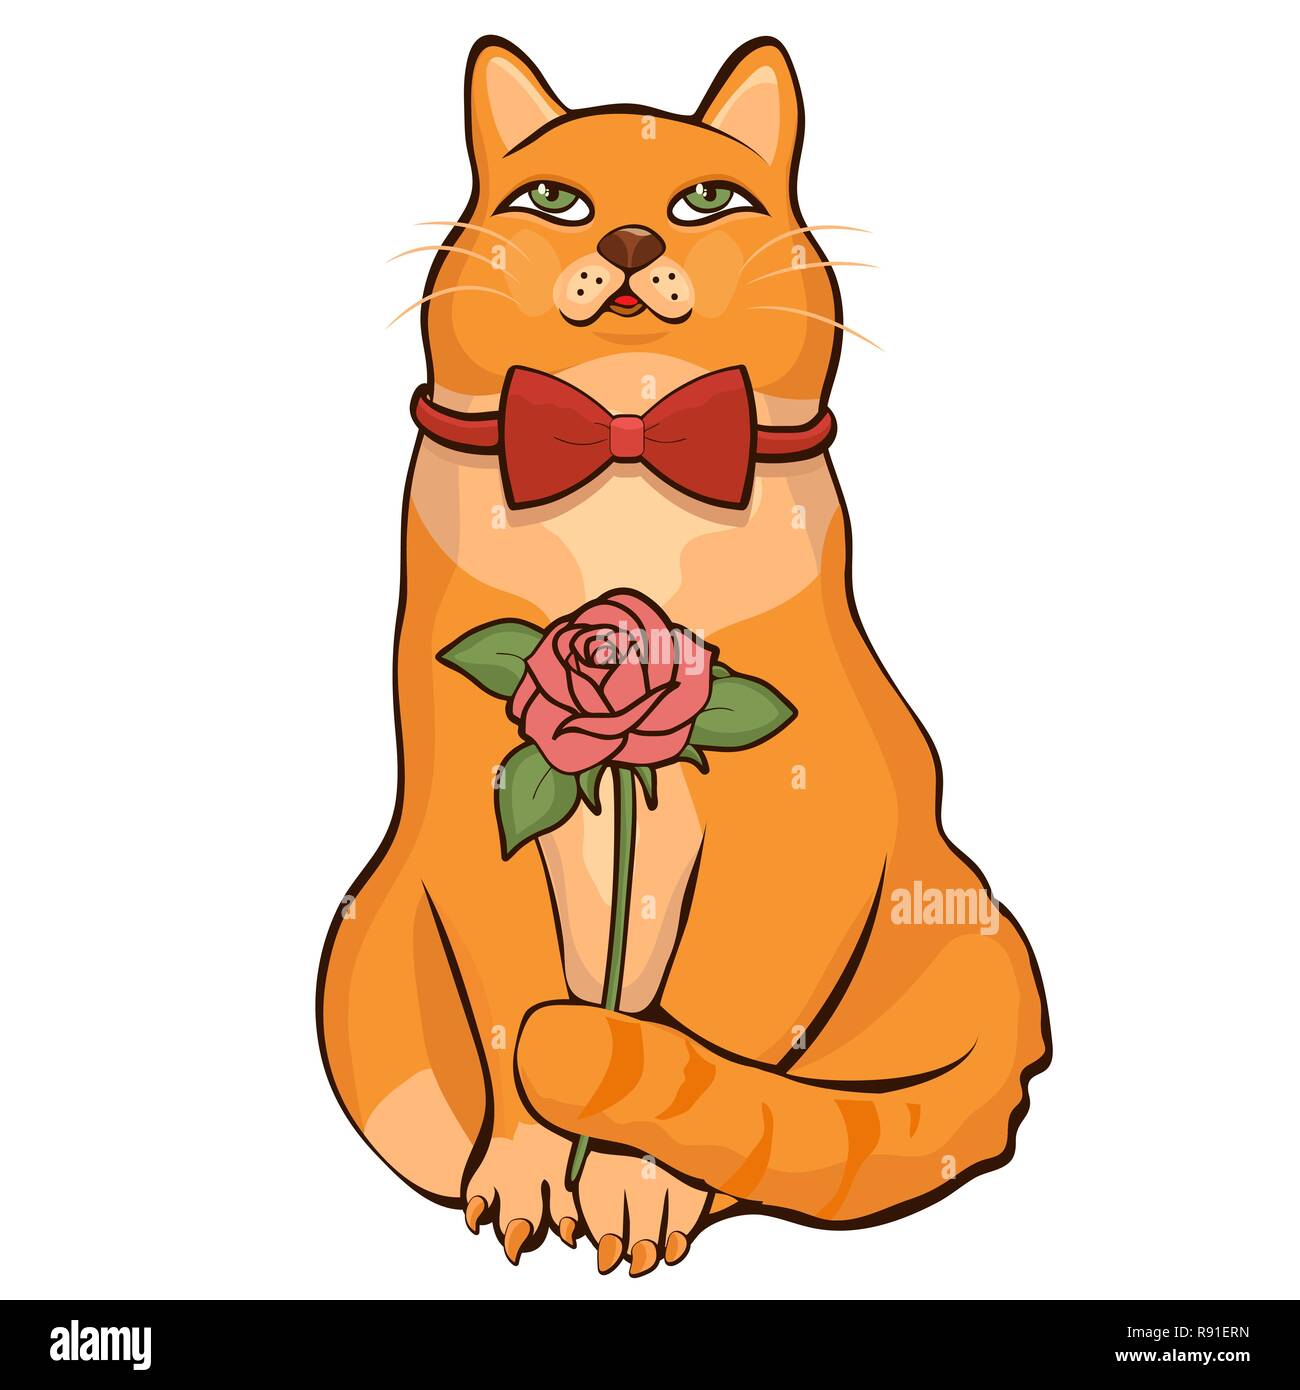 March Cat Hand Drawing Cartoon Character Vector Illustration Sticker Painted Comical Cute Funny Ginger Male Cat With Bow Tie Holding A Flower Tail Stock Vector Image Art Alamy